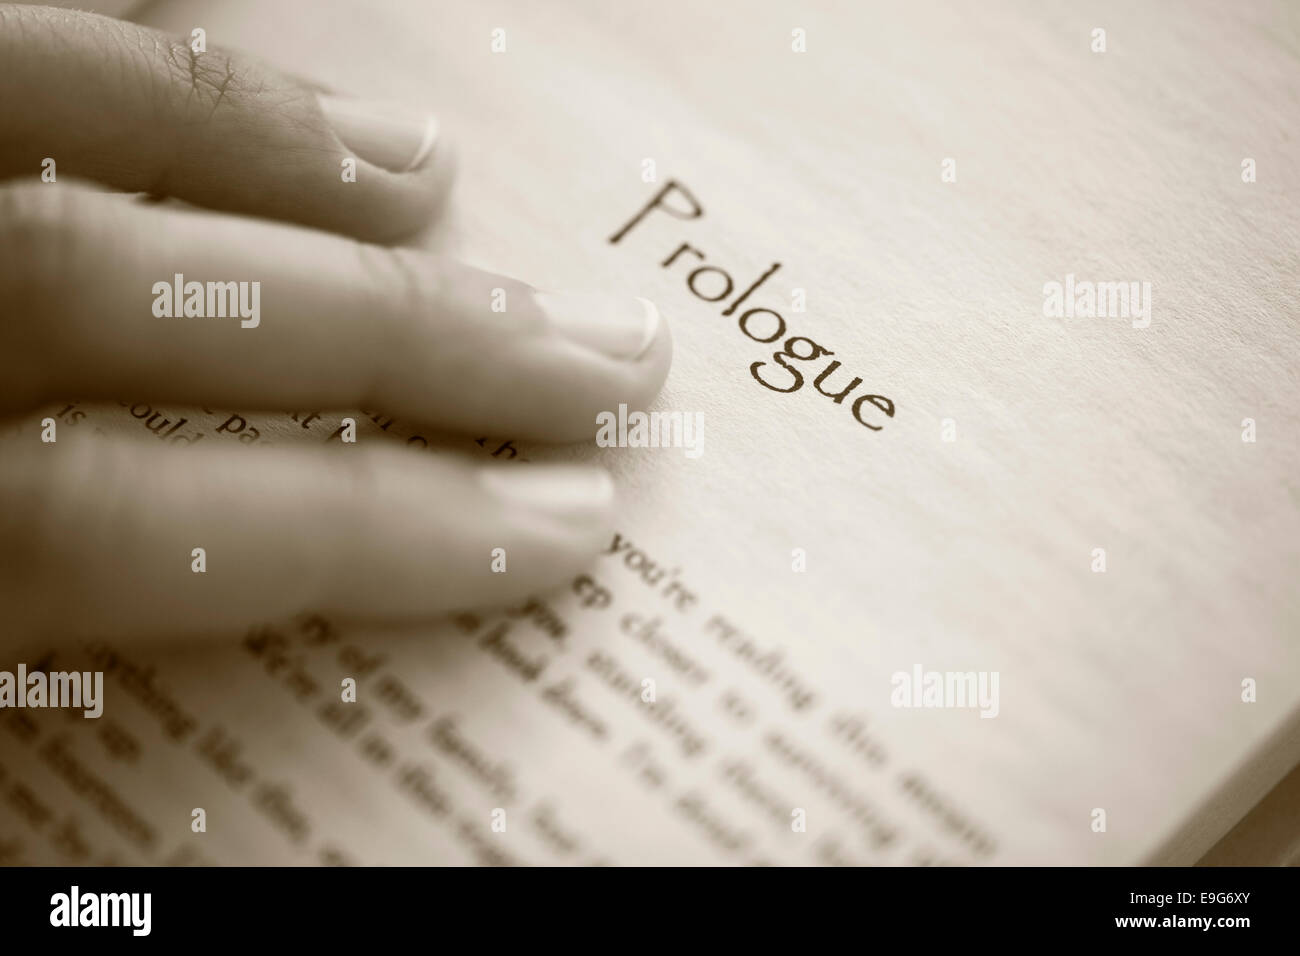 Woman's hand on book page with title 'Prologue'. Shallow depth of field. Sepia. Stock Photo